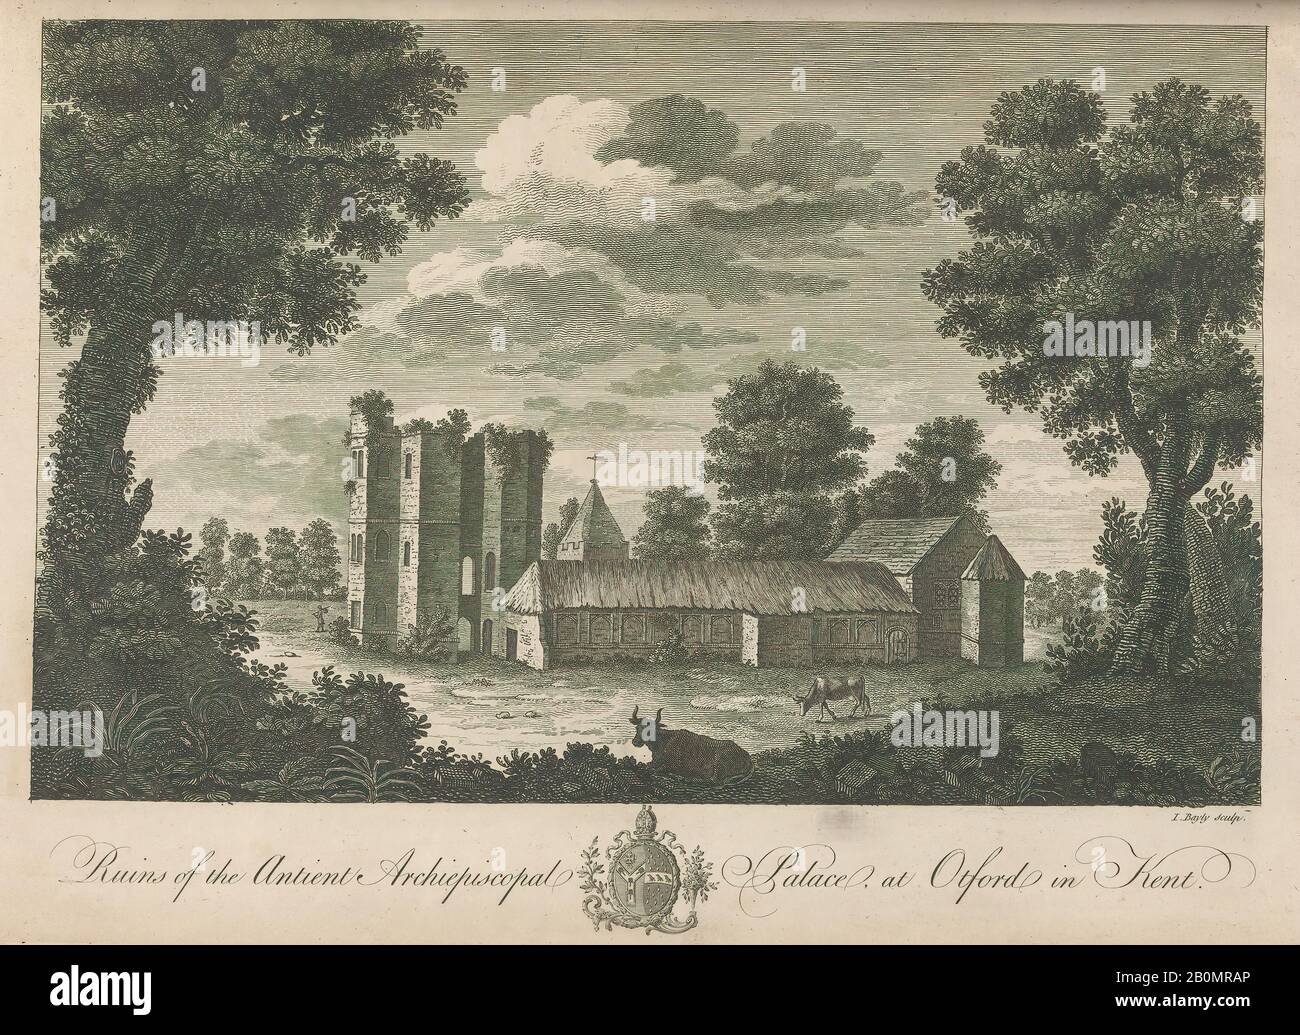 Etched by John Bayly, Ruins of the Ancient Archiepiscopal Palace at Otford in Kent, from Edward Hasted's, The History and Topographical Survey of the County of Kent, vols. 1-3, Etched by John Bayly (British, active 1755–1782), 1777–90, Etching and engraving, Book: 17 5/16 × 11 × 13/16 in. (44 × 28 × 2 cm), Sheet: 16 15/16 × 10 5/8 in. (43 × 27 cm), Plate: 10 1/16 × 14 in. (25.5 × 35.5 cm), Books Stock Photo